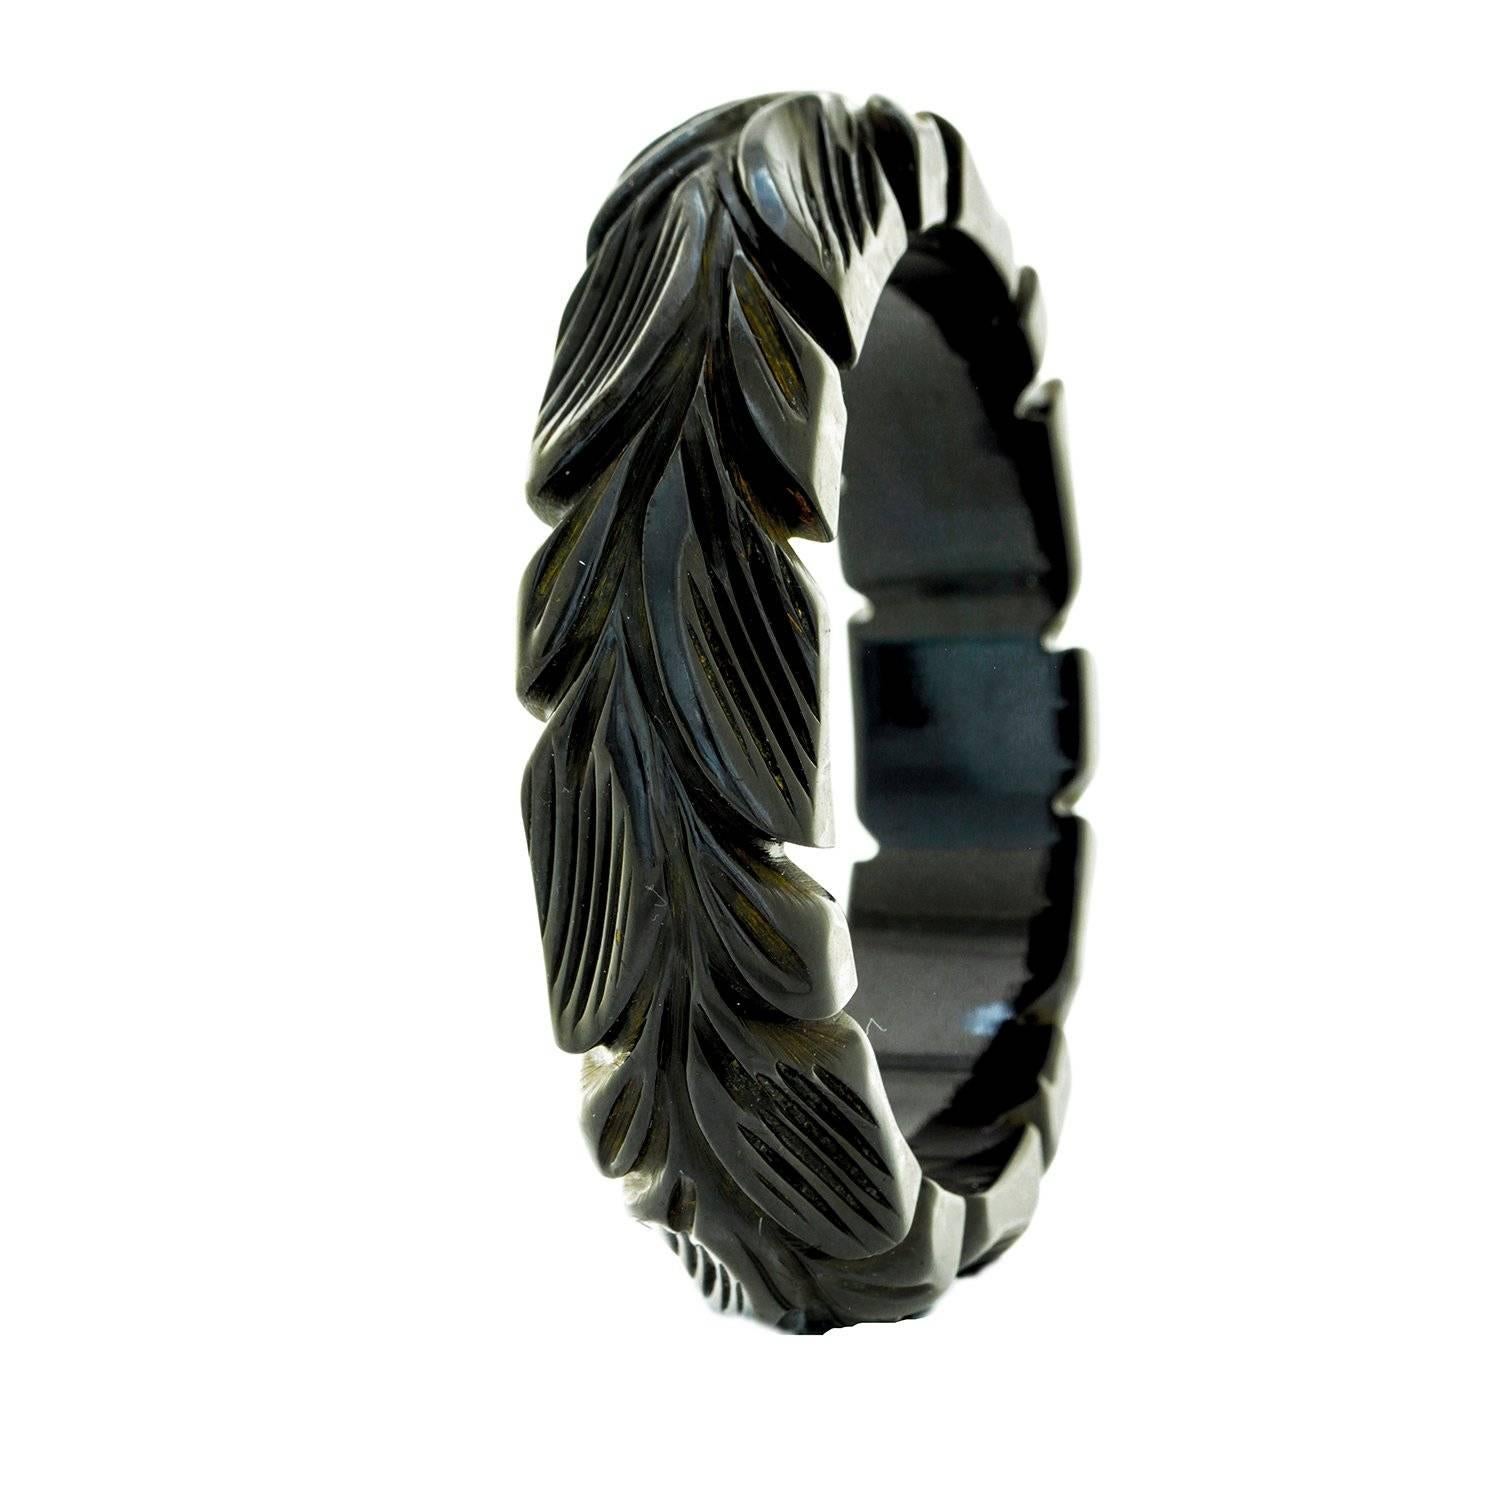 Art Deco Black Brown Deeply Carved Bakelite Bangle In Excellent Condition For Sale In Balmain, AU